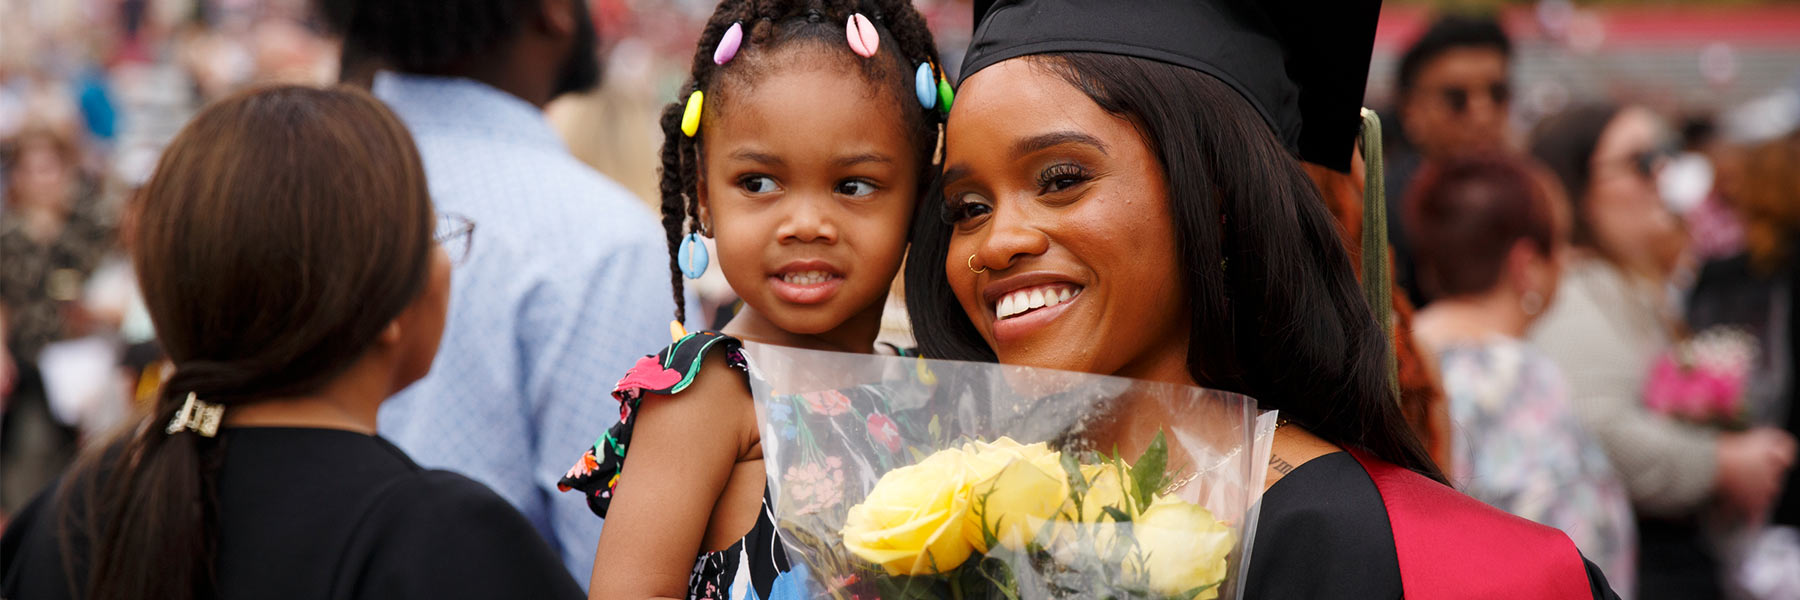 A graduate in cap and gown holds flowers with one arm and a young girl in her other arm; other commencement attendees seen in background